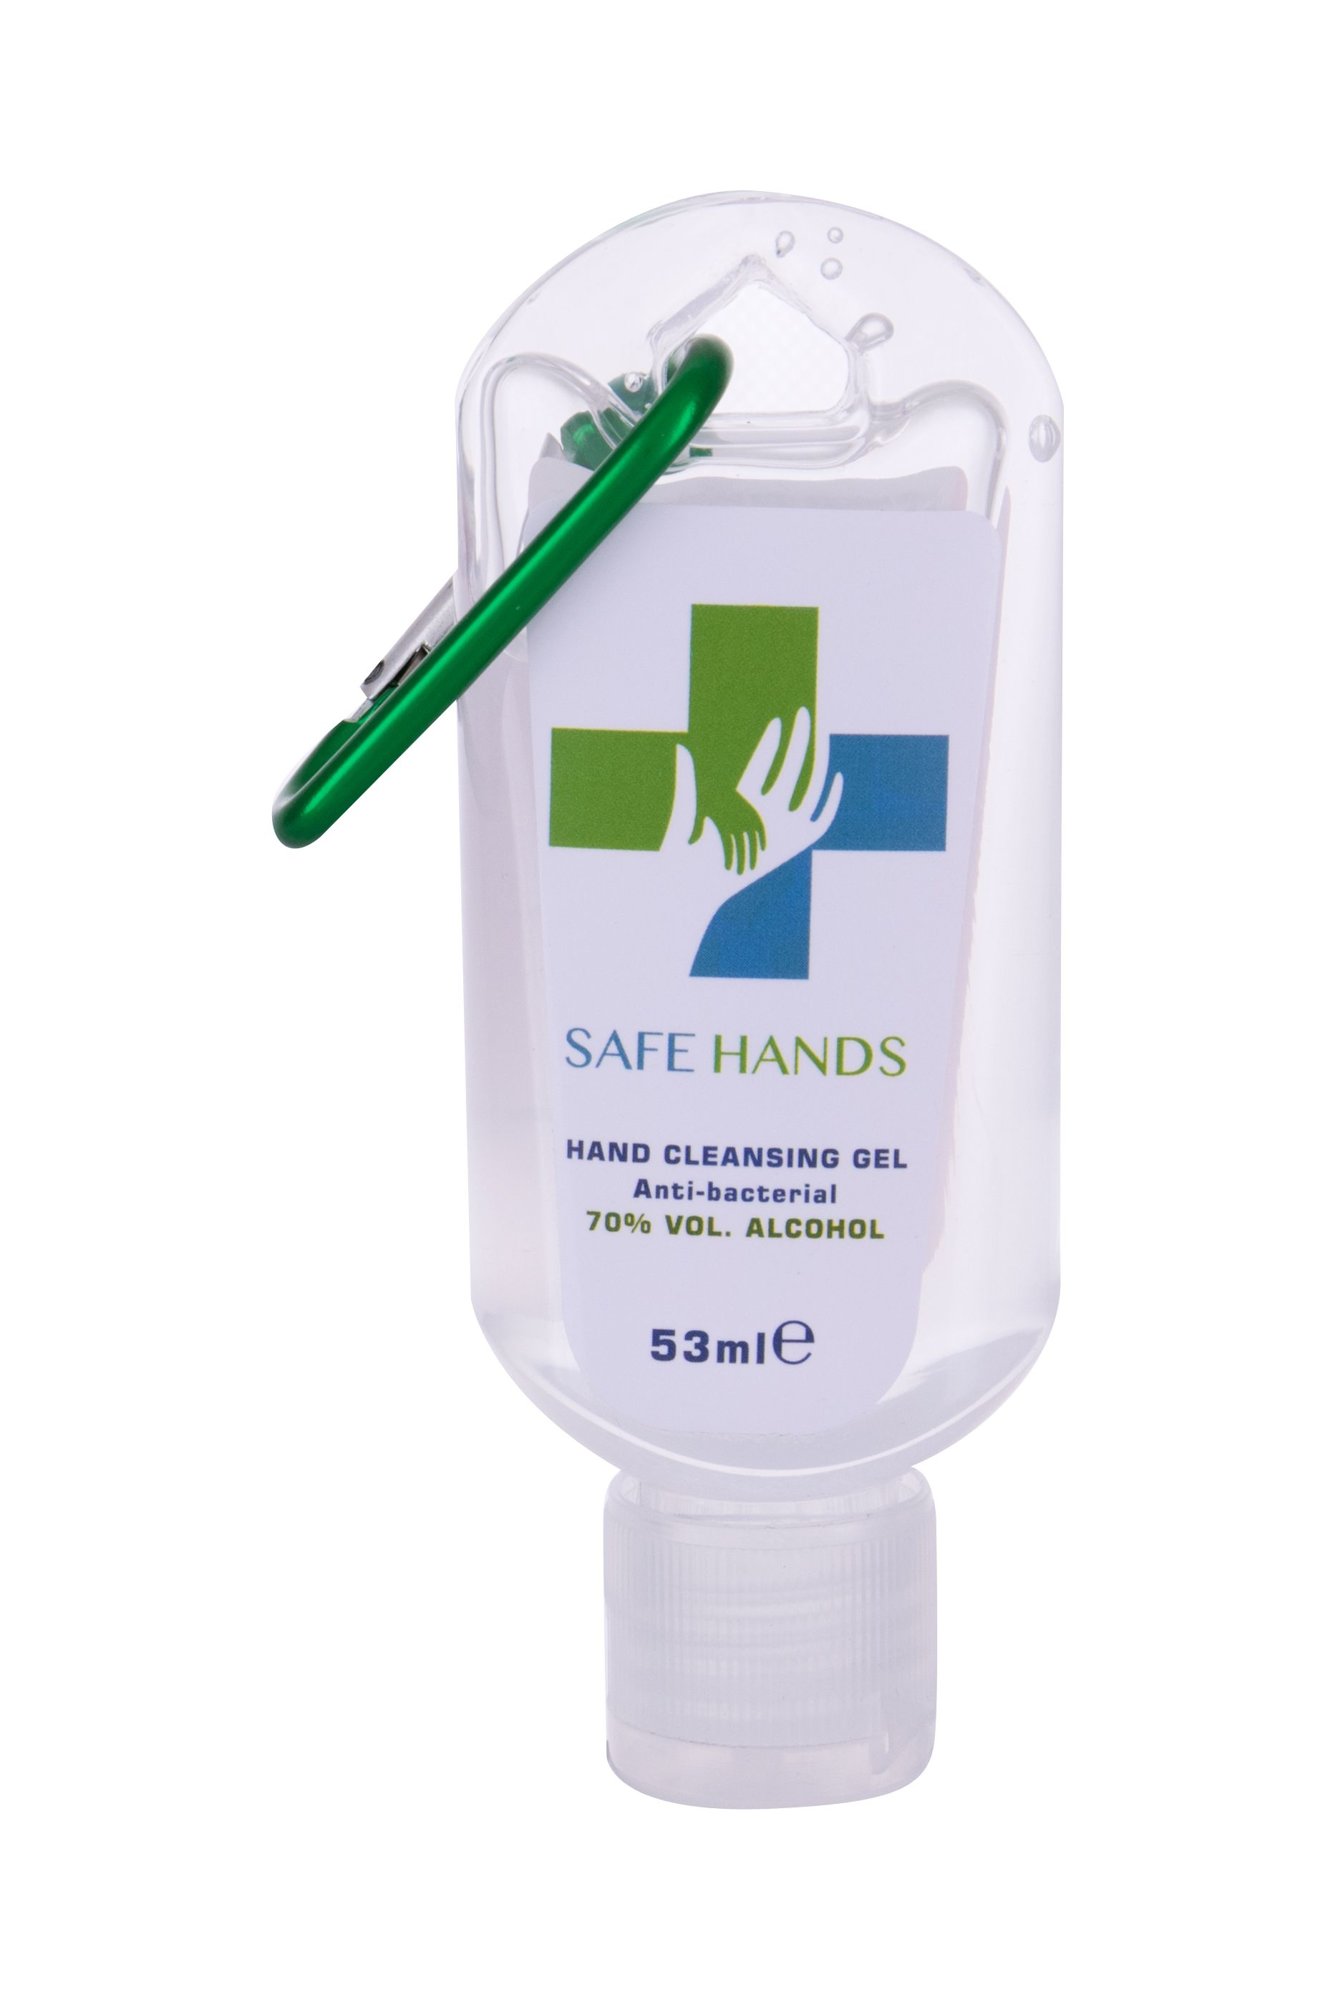 Safe Hands Anti-bacterial